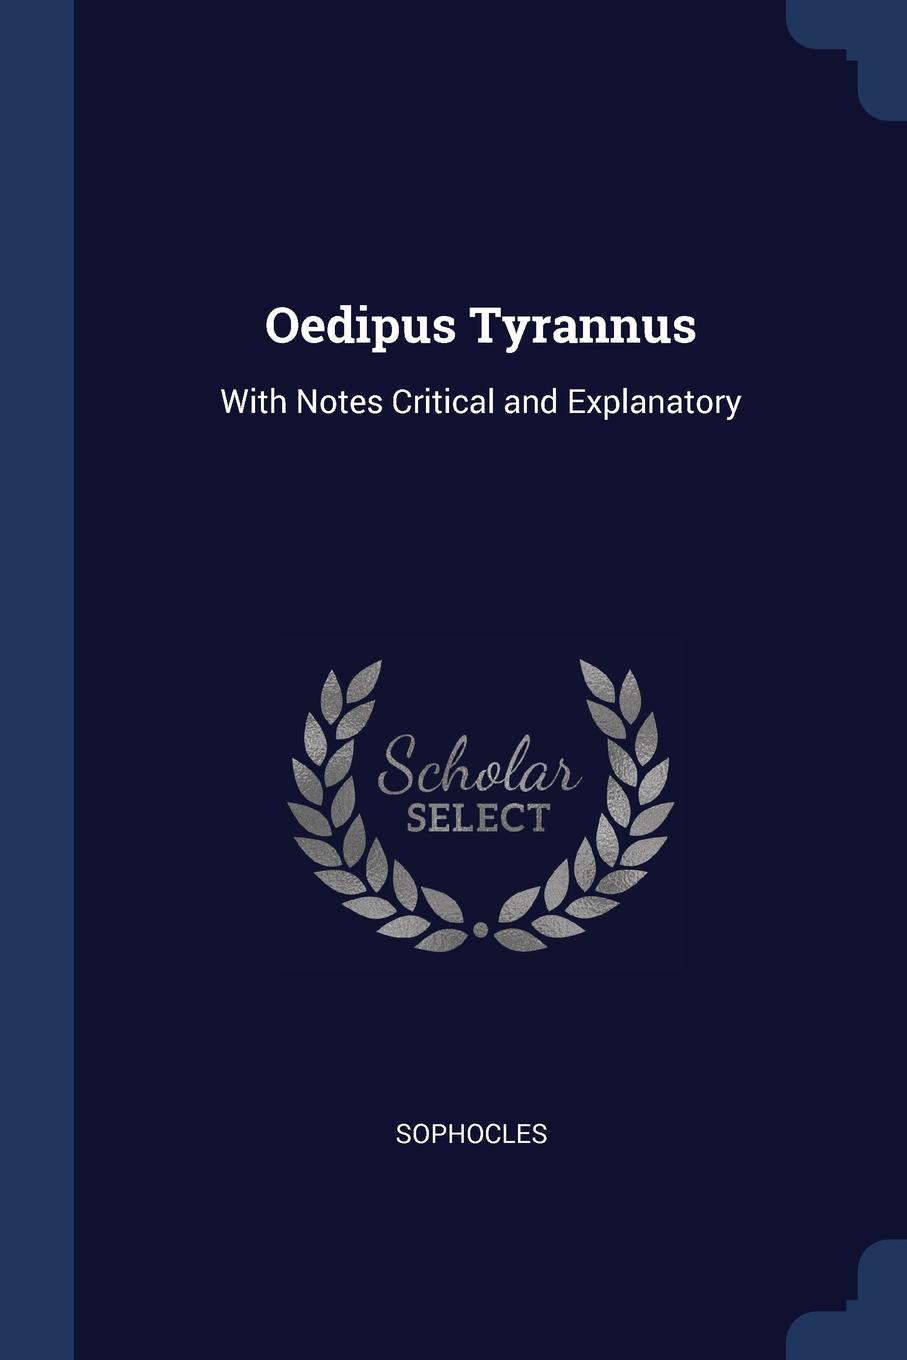 Oedipus Tyrannus. With Notes Critical and Explanatory